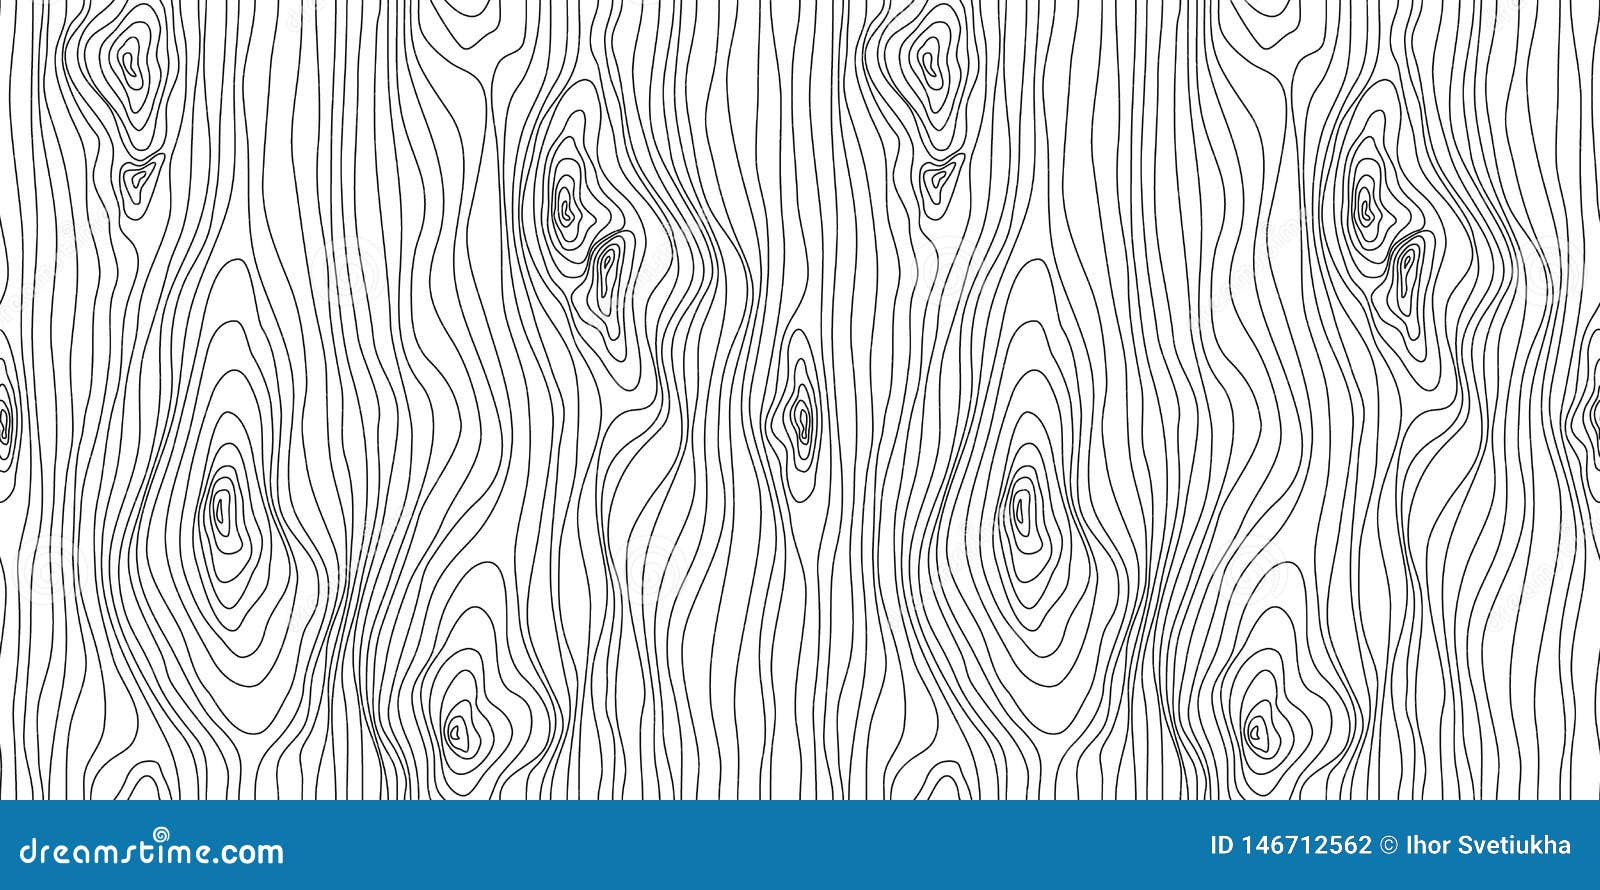 wooden seamless texture. wood grain pattern. abstract fibers structure background,  